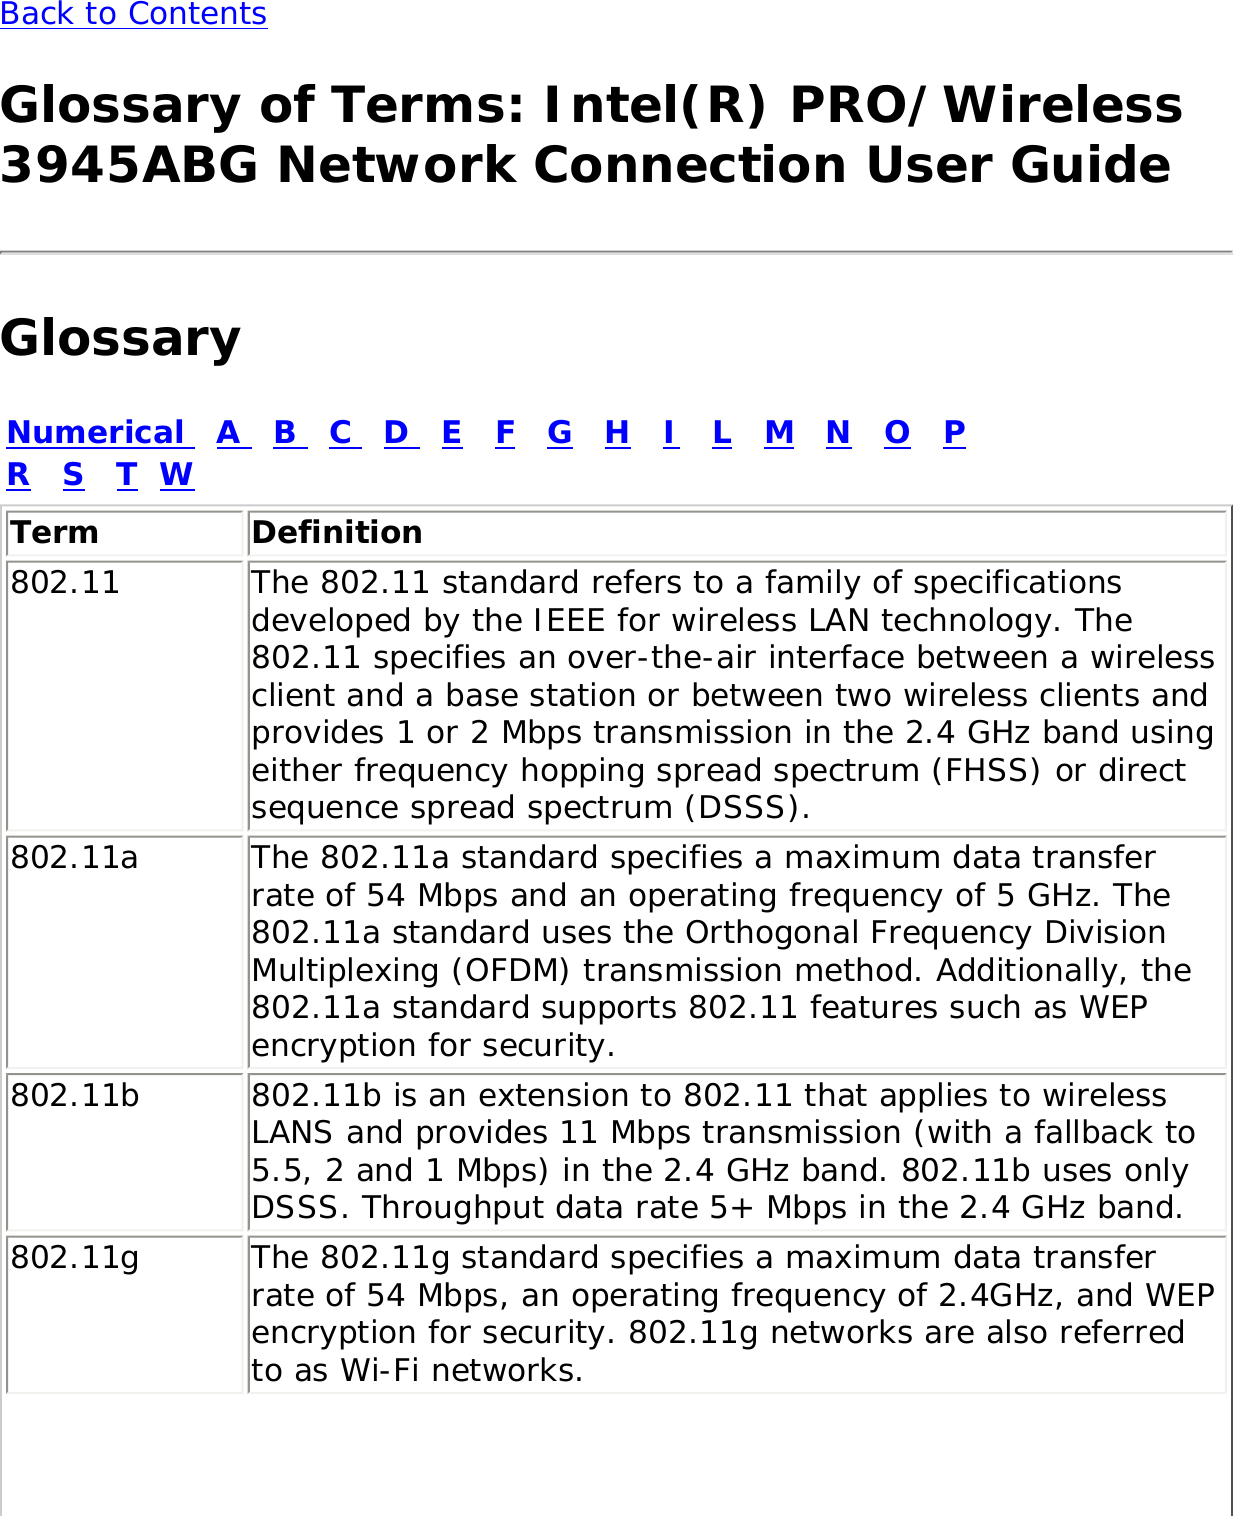 Back to Contents Glossary of Terms: Intel(R) PRO/Wireless 3945ABG Network Connection User GuideGlossaryNumerical   A   B   C   D   E   F   G   H   I   L   M   N   O   P   R   S   T  WTerm Definition802.11 The 802.11 standard refers to a family of specifications developed by the IEEE for wireless LAN technology. The 802.11 specifies an over-the-air interface between a wireless client and a base station or between two wireless clients and provides 1 or 2 Mbps transmission in the 2.4 GHz band using either frequency hopping spread spectrum (FHSS) or direct sequence spread spectrum (DSSS).802.11a The 802.11a standard specifies a maximum data transfer rate of 54 Mbps and an operating frequency of 5 GHz. The 802.11a standard uses the Orthogonal Frequency Division Multiplexing (OFDM) transmission method. Additionally, the 802.11a standard supports 802.11 features such as WEP encryption for security.802.11b 802.11b is an extension to 802.11 that applies to wireless LANS and provides 11 Mbps transmission (with a fallback to 5.5, 2 and 1 Mbps) in the 2.4 GHz band. 802.11b uses only DSSS. Throughput data rate 5+ Mbps in the 2.4 GHz band.802.11g The 802.11g standard specifies a maximum data transfer rate of 54 Mbps, an operating frequency of 2.4GHz, and WEP encryption for security. 802.11g networks are also referred to as Wi-Fi networks.